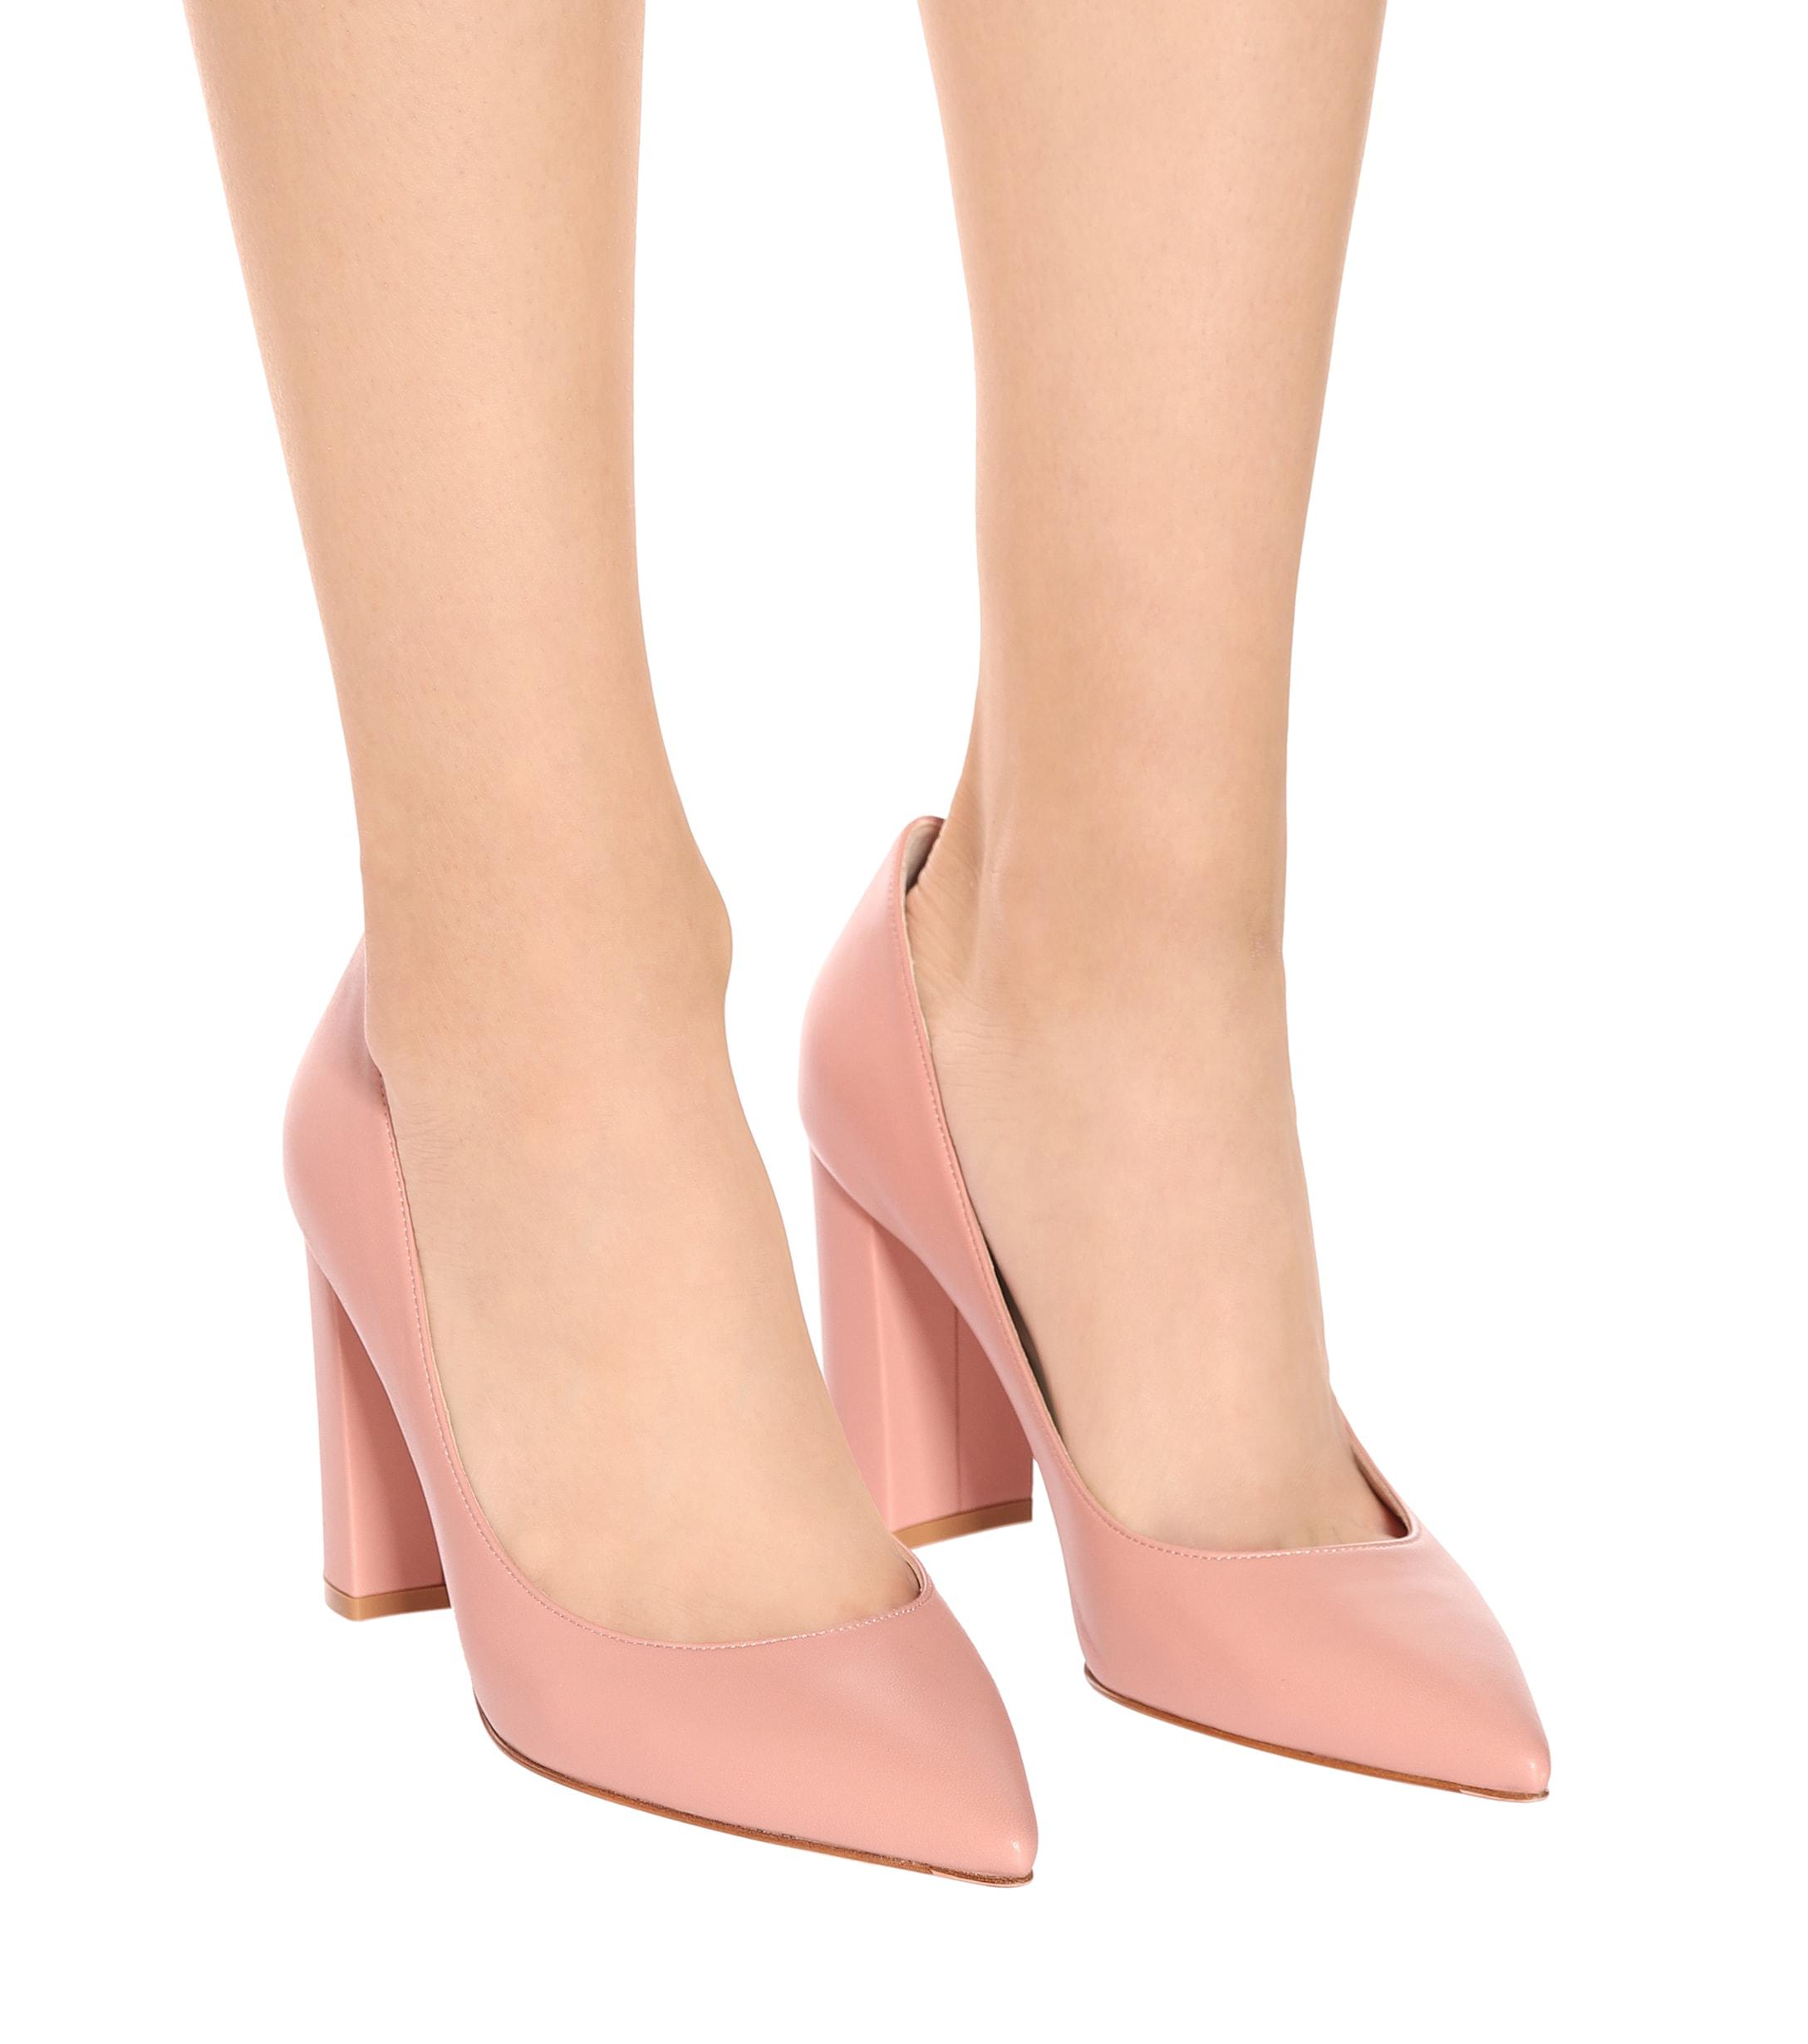 Gianvito Rossi Piper 85 Leather Pumps in Pink - Lyst